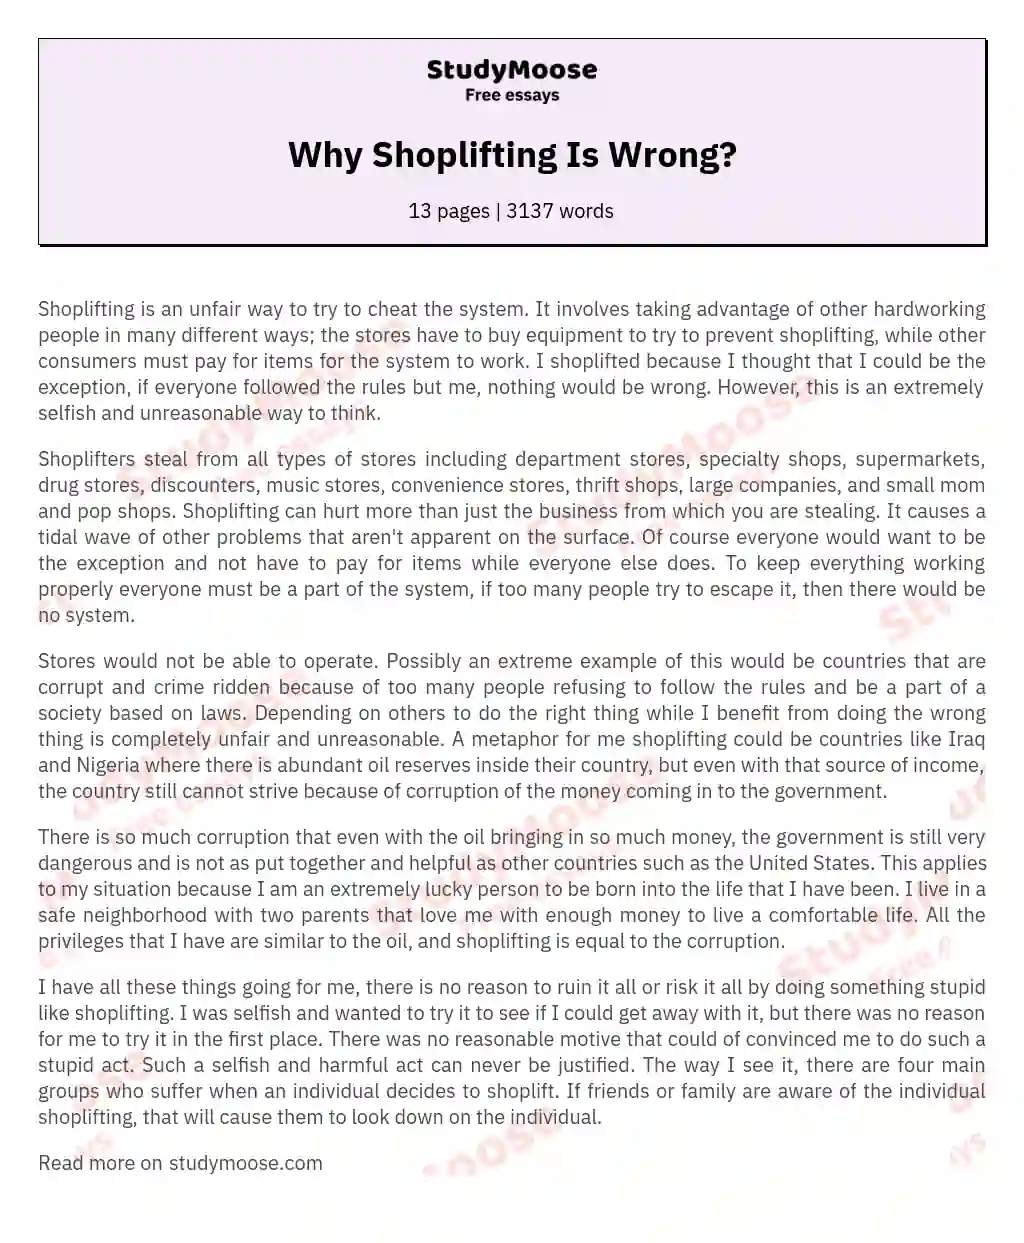 Why Shoplifting Is Wrong? essay